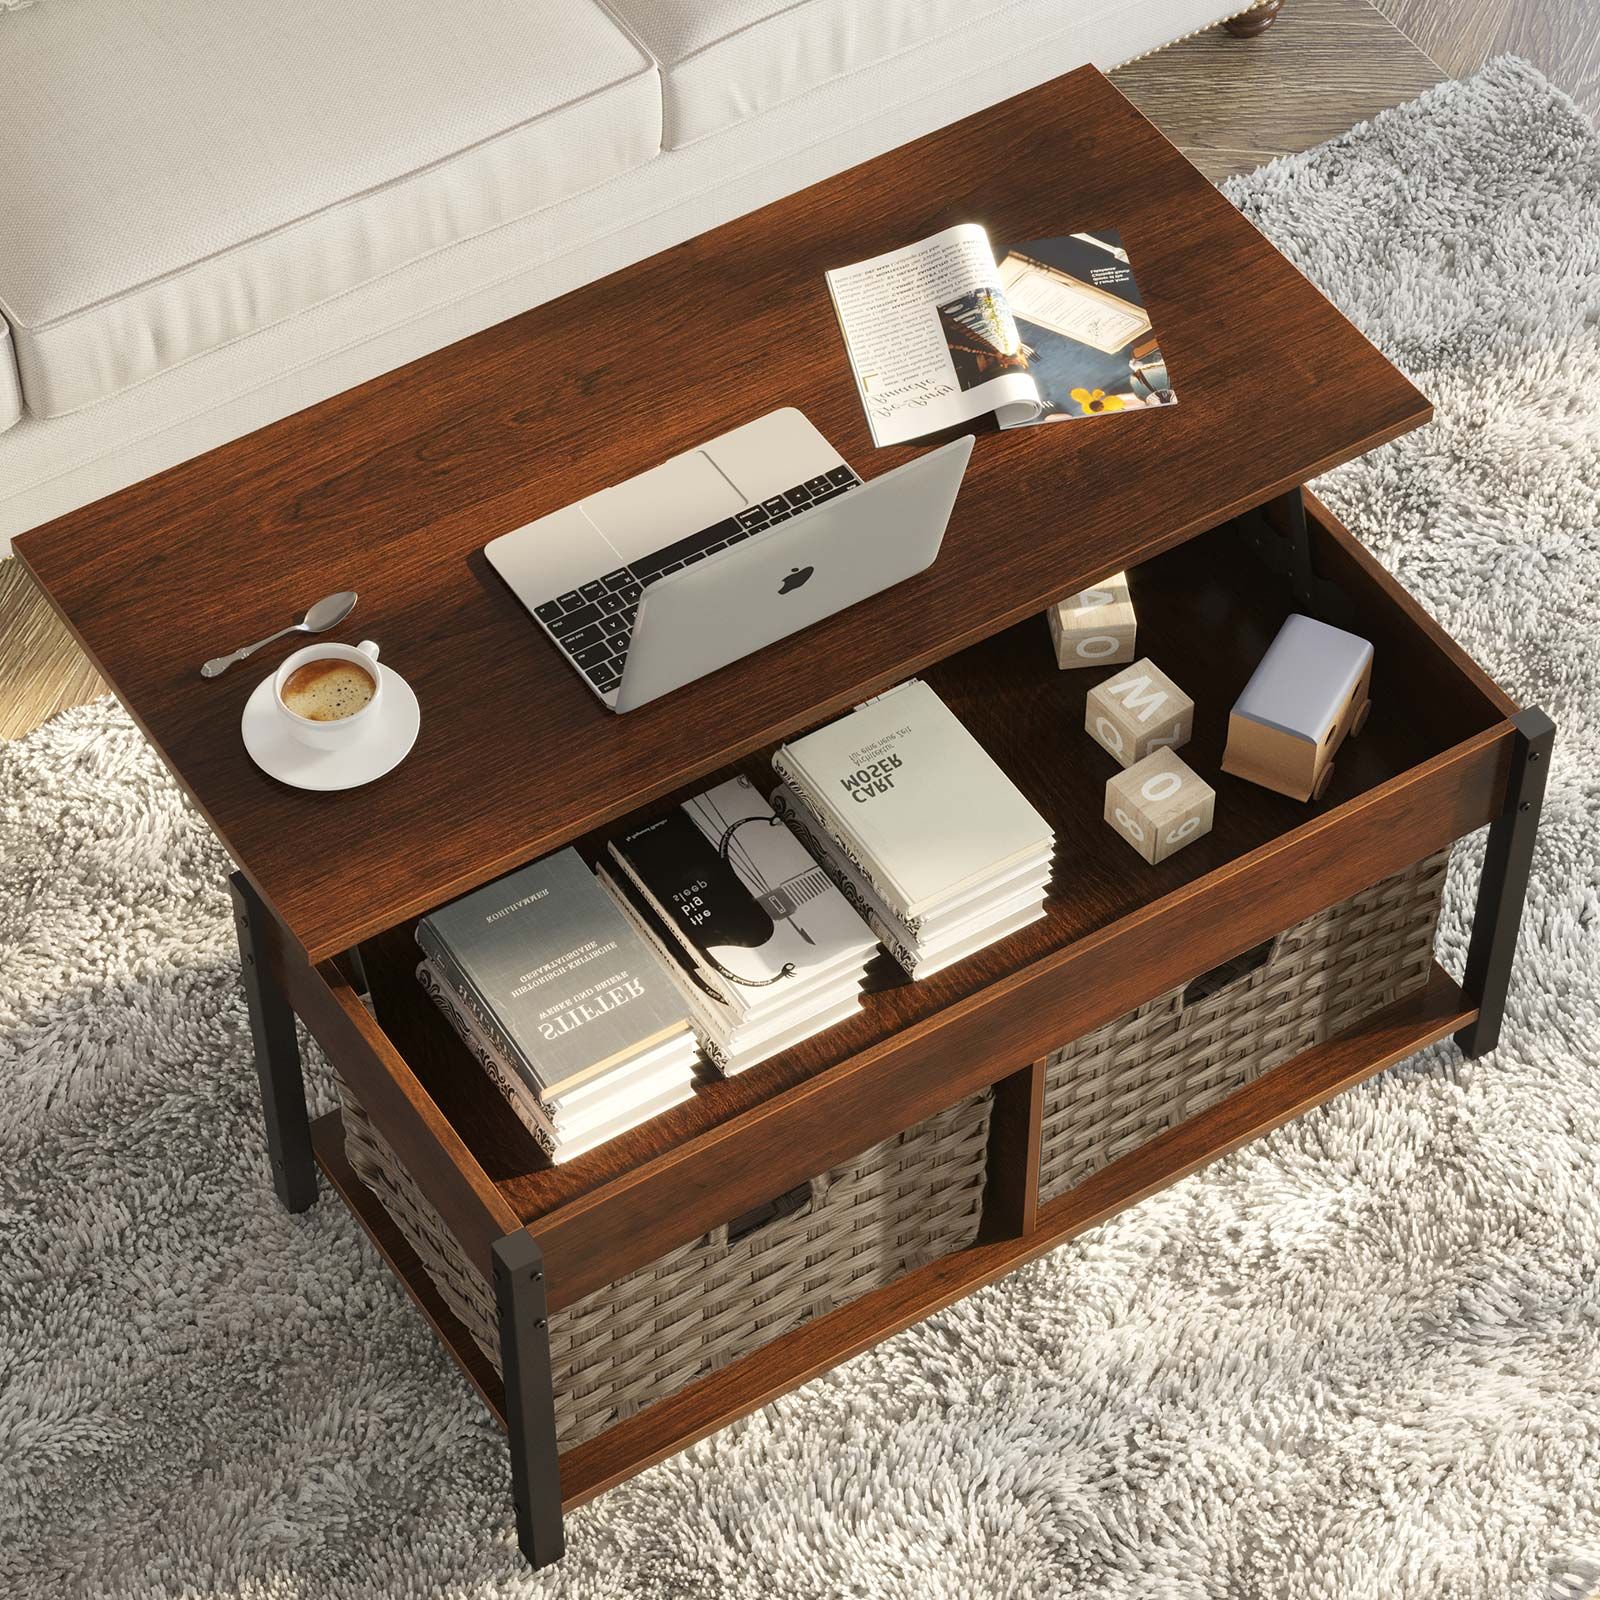 Lift Top Coffee Tables With Shelves Pertaining To Latest Rolanstar Coffee Table, Lift Top Coffee Table With Storage Shelves And (View 8 of 15)